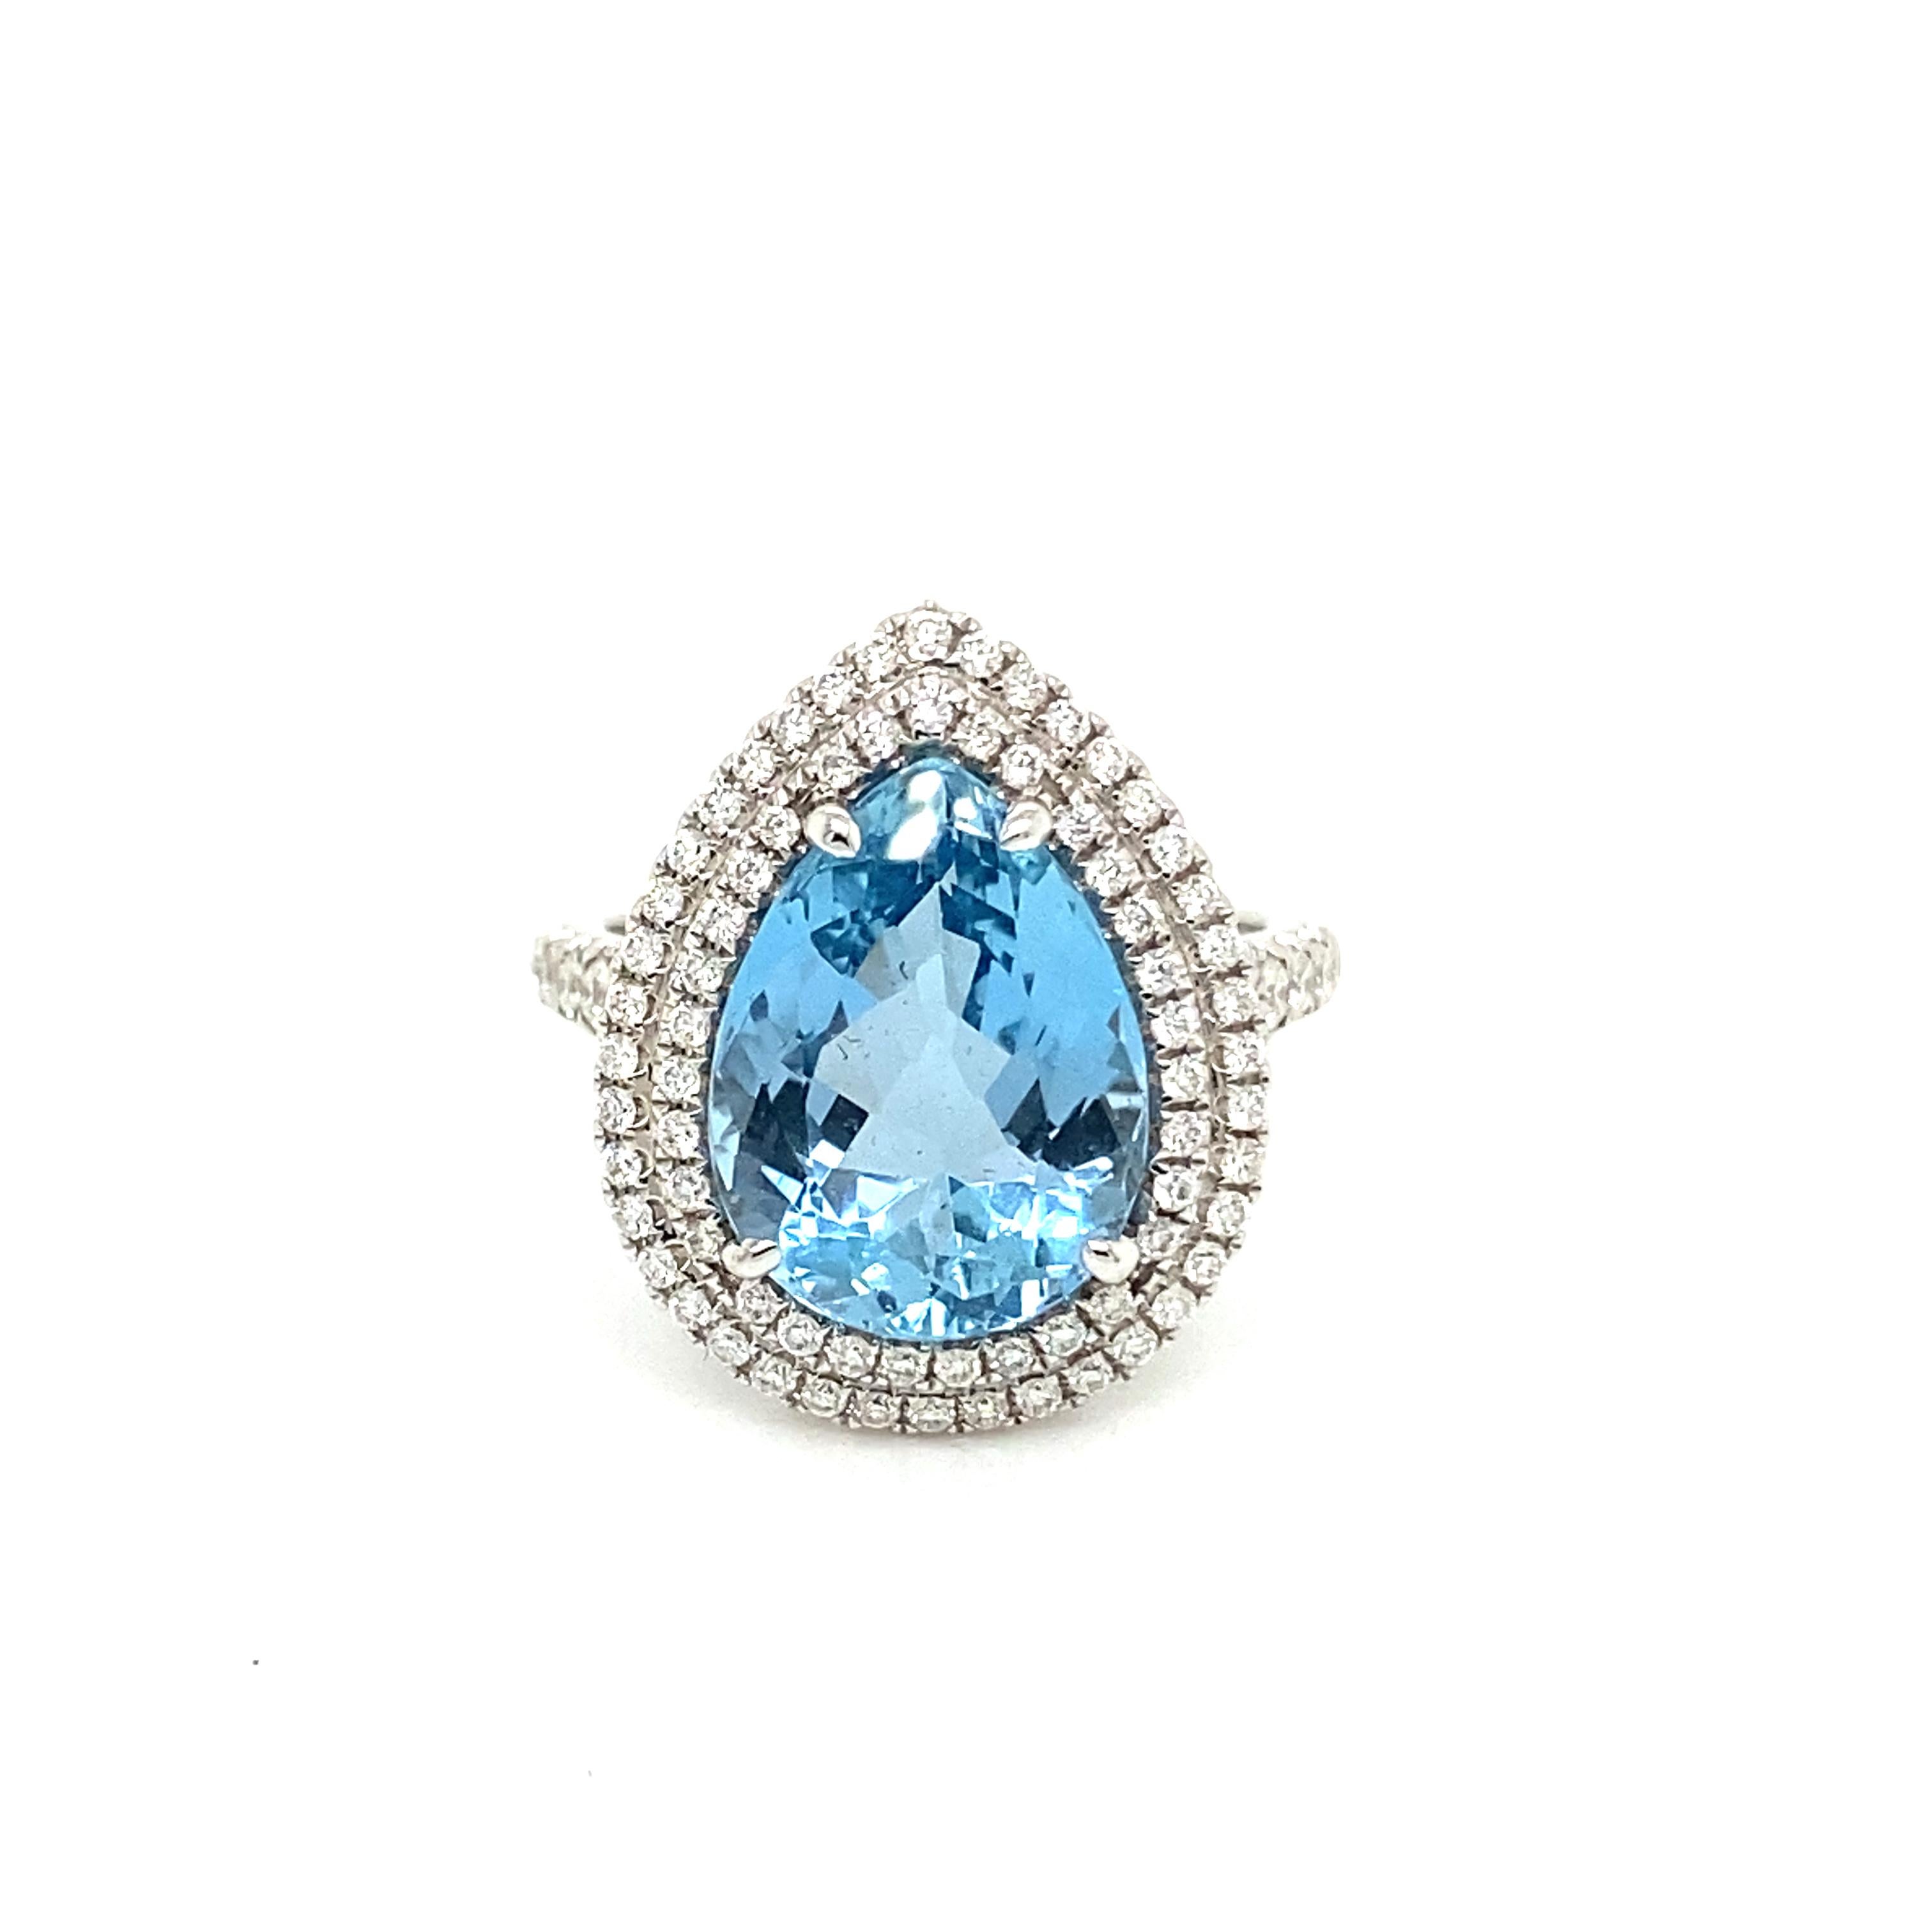 4.82 Carat Pear Shape Aquamarine and Diamond Cocktail Ring For Sale 1